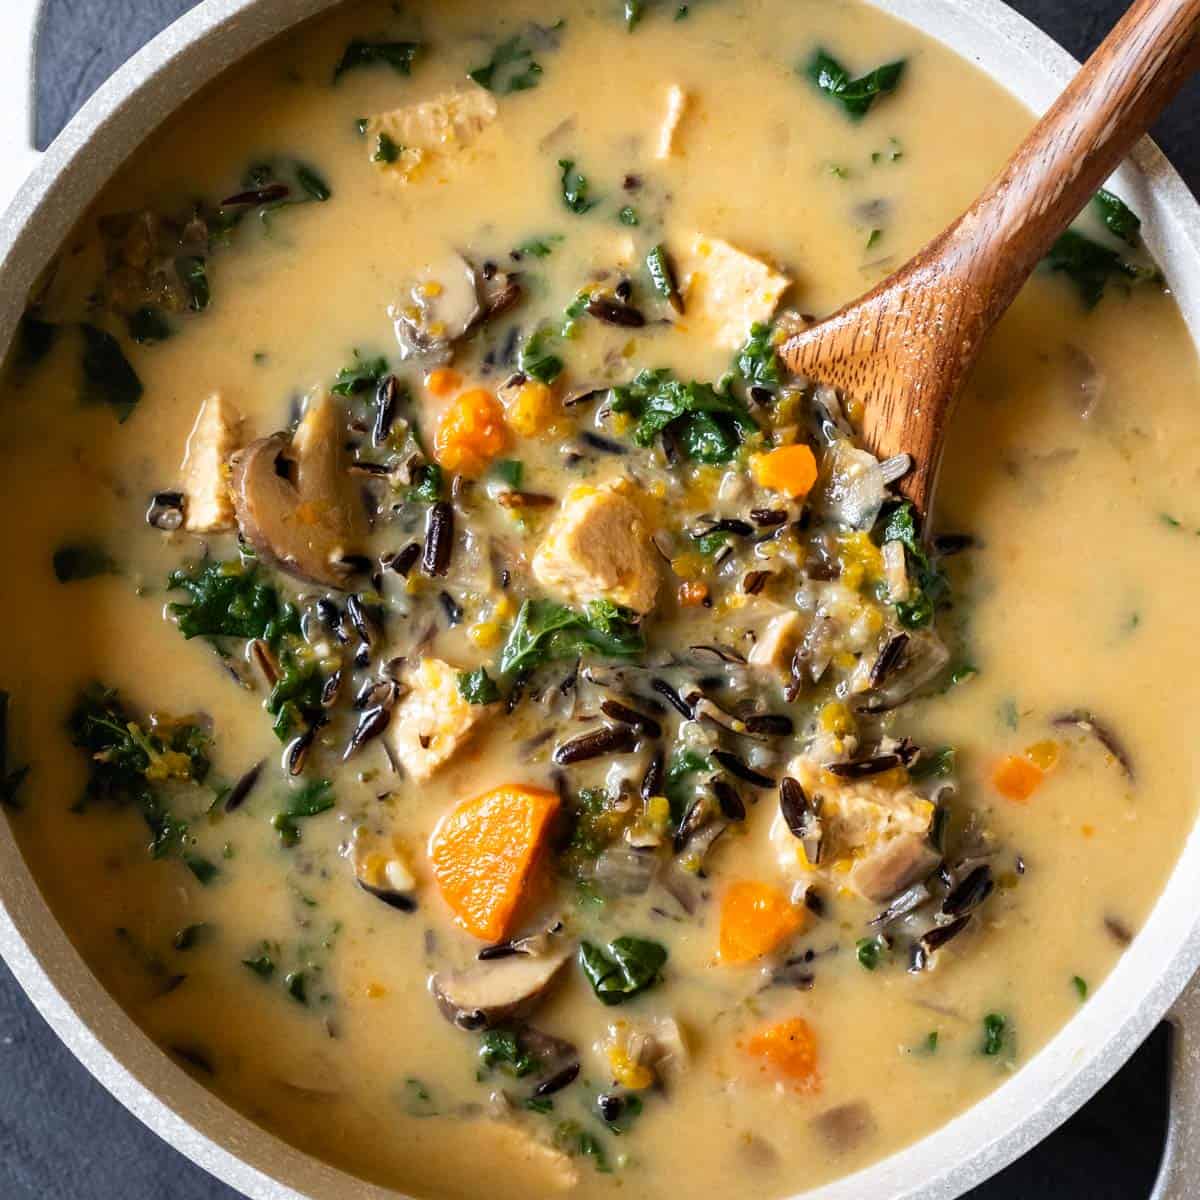 Mushroom & Wild Rice Soup (Ready in 20 Minutes) - Plain Chicken